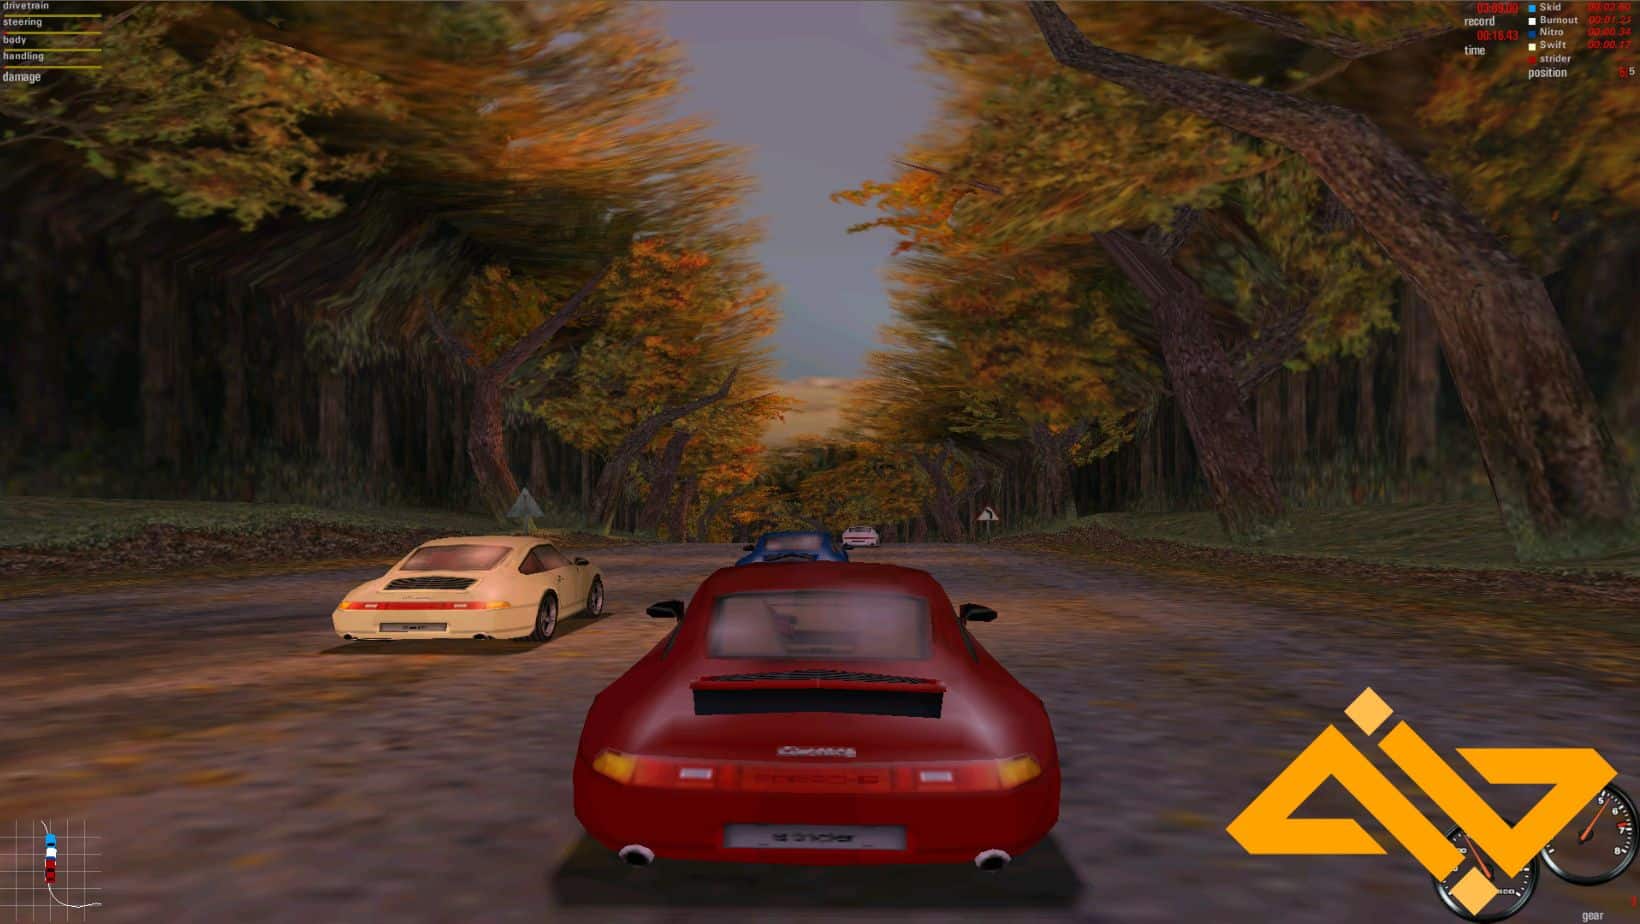 Need for Speed: Porsche Unleashed was a dream game for Porsche fans.